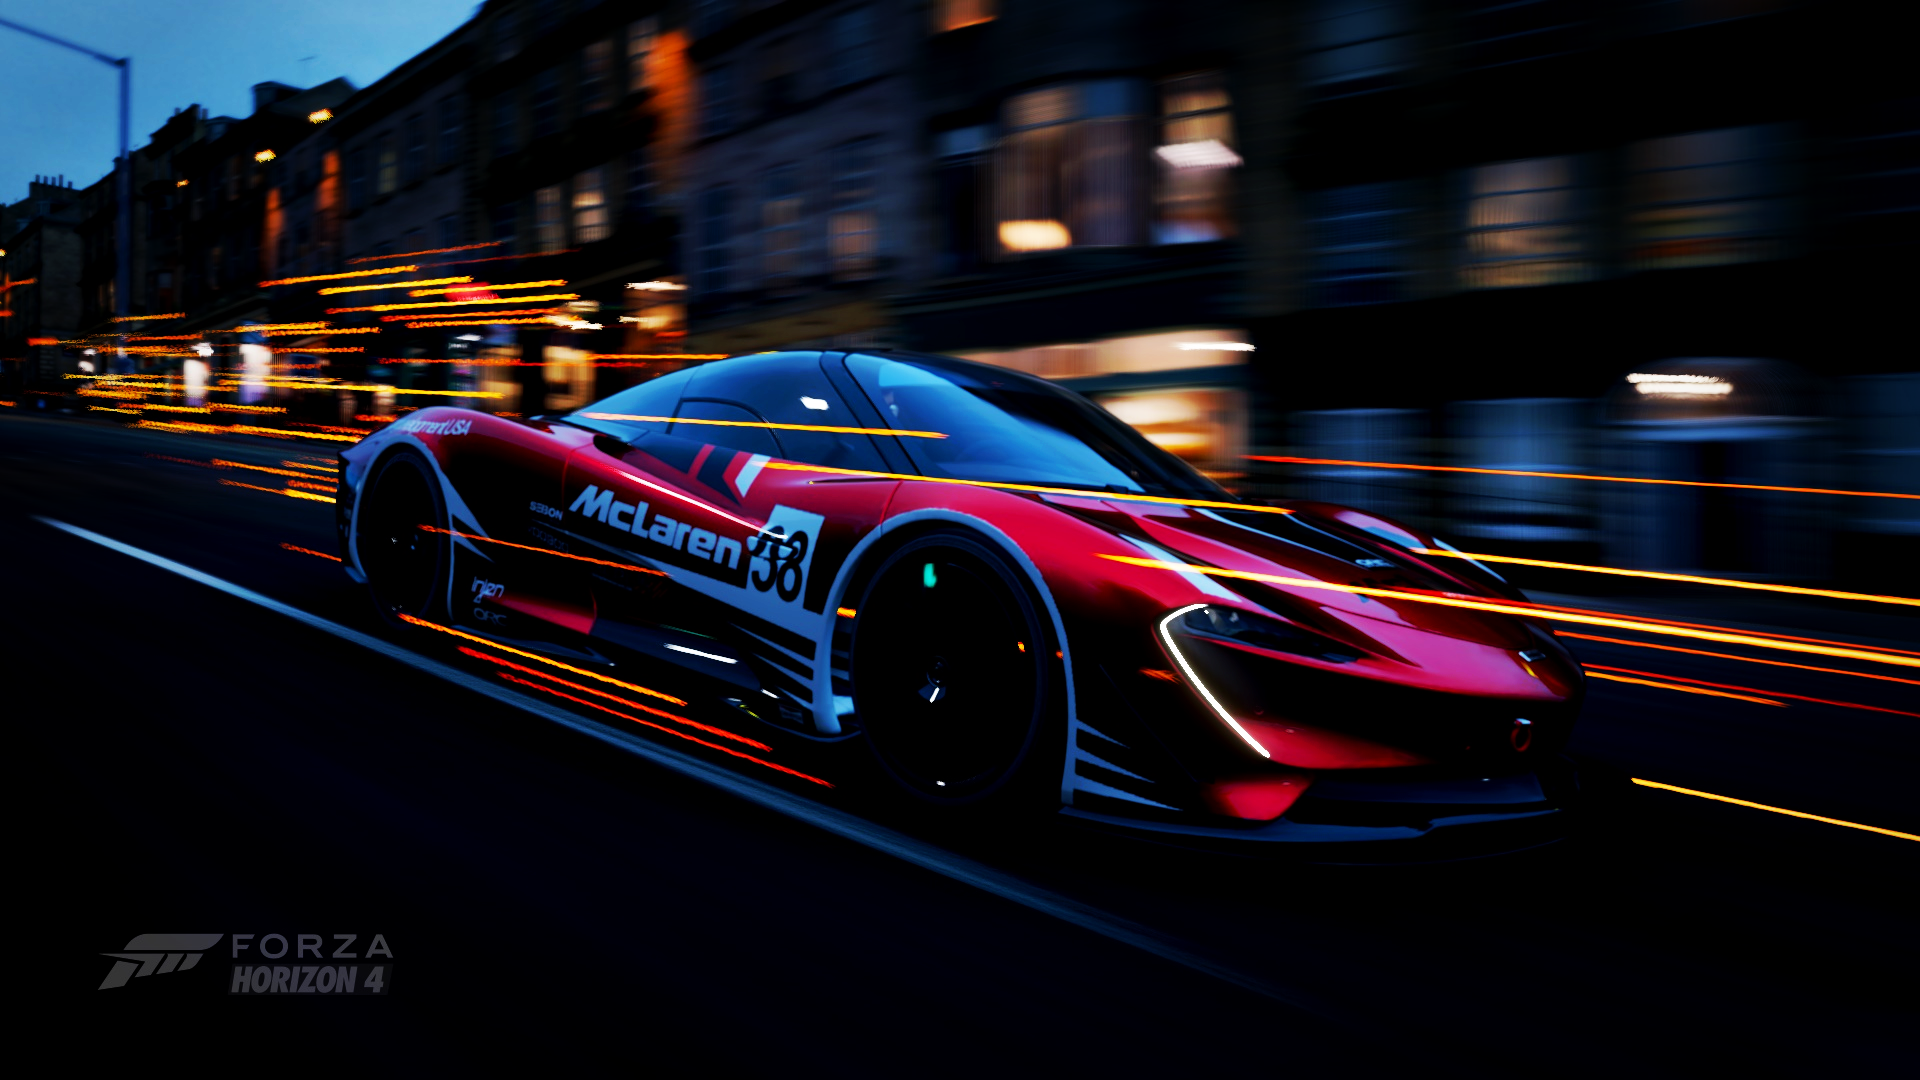 Forza Horizon McLaren Speedtail AMG ONE Video Games Car Front Angle View Logo Headlights Blurred 1920x1080